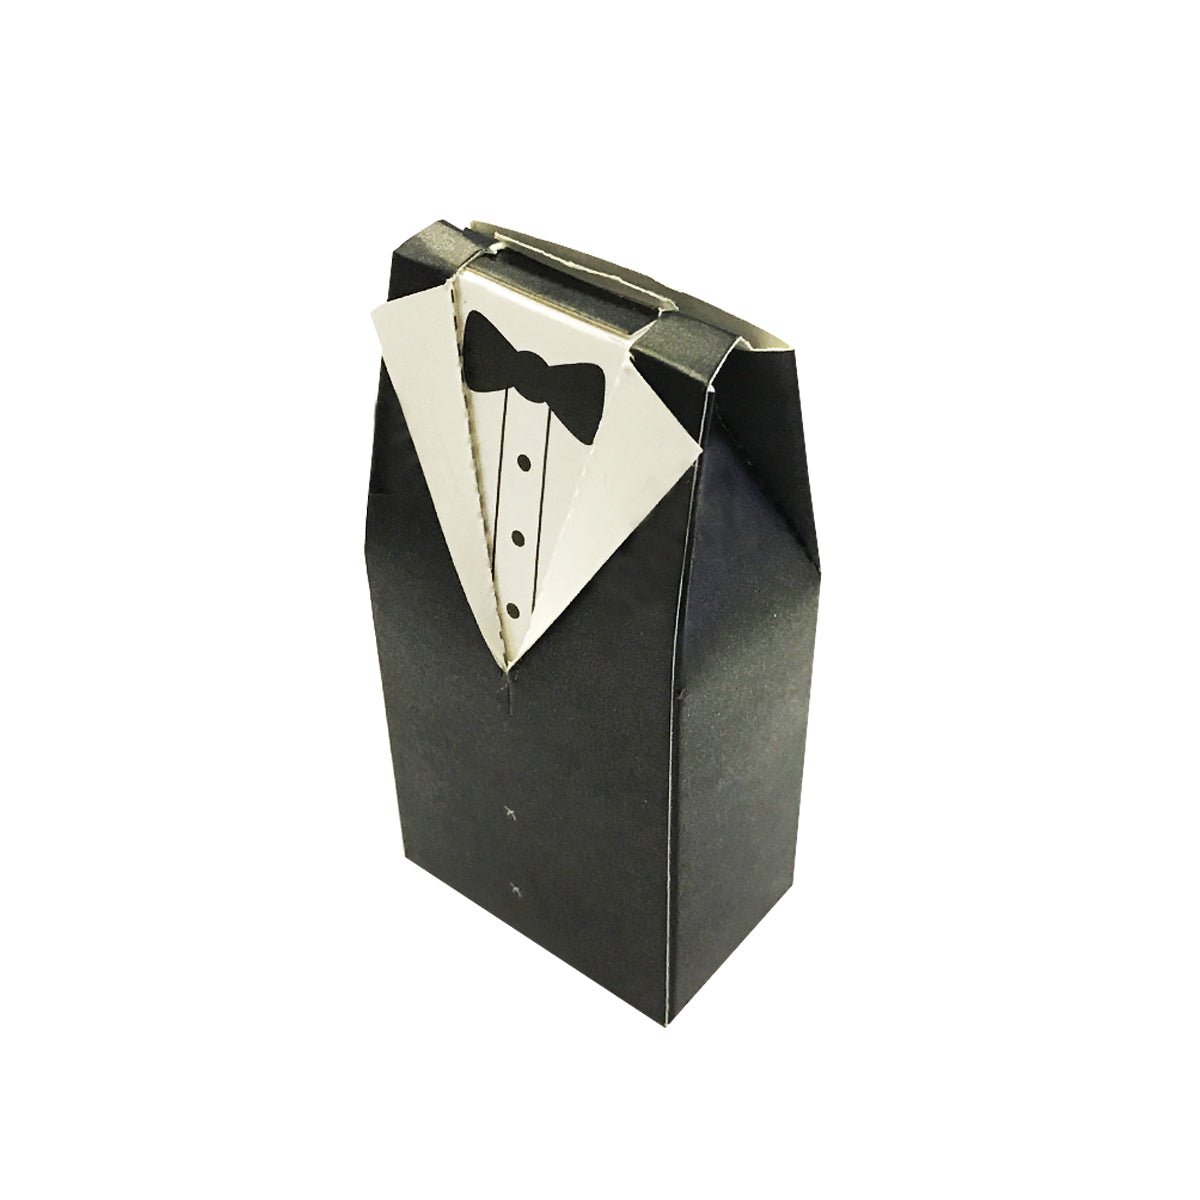 Wrapables Tuxedo and Bridal Gown Wedding Party Favor Boxes Gift Boxes with Ribbon (Set of 100)